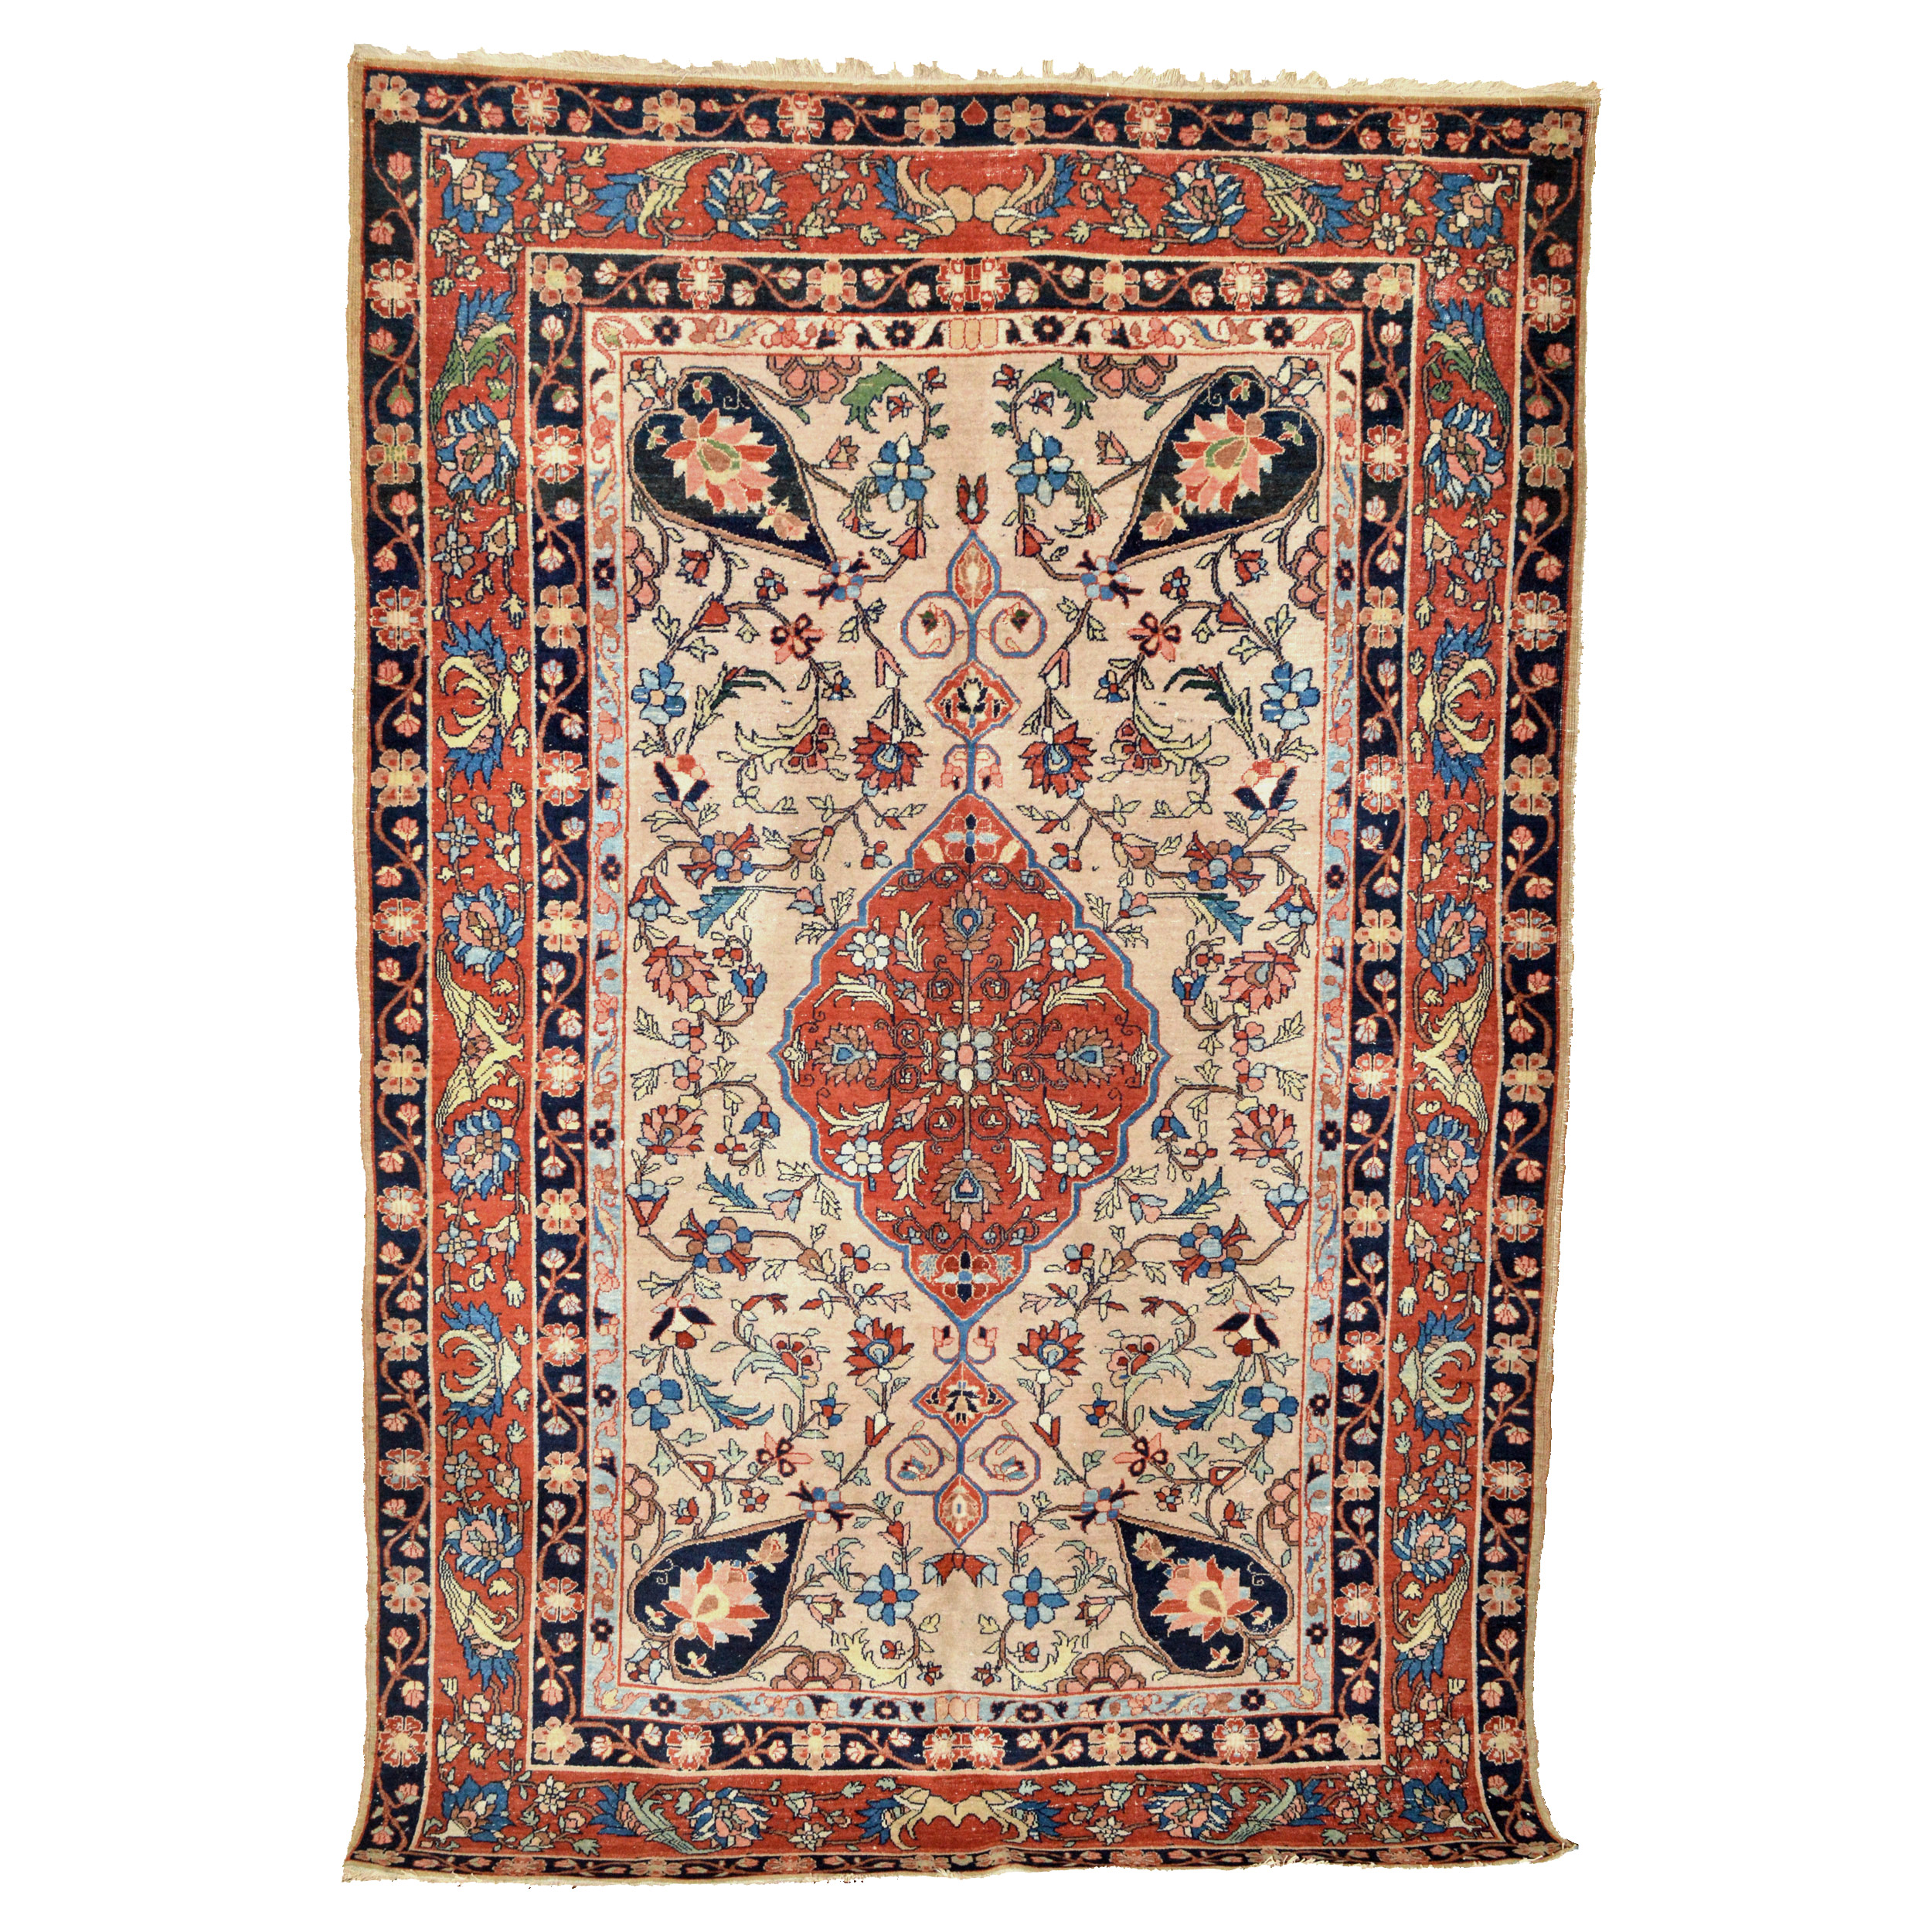 An antique Persian rug probably woven in the Sarouk area circa 1925. The light camel color field is decorated with a medallion and stylized floral elements - Douglas Stock Gallery, antique Oriental rugs Brookline, Boston, Newton, Wellesley, Weston, Natick,MA area